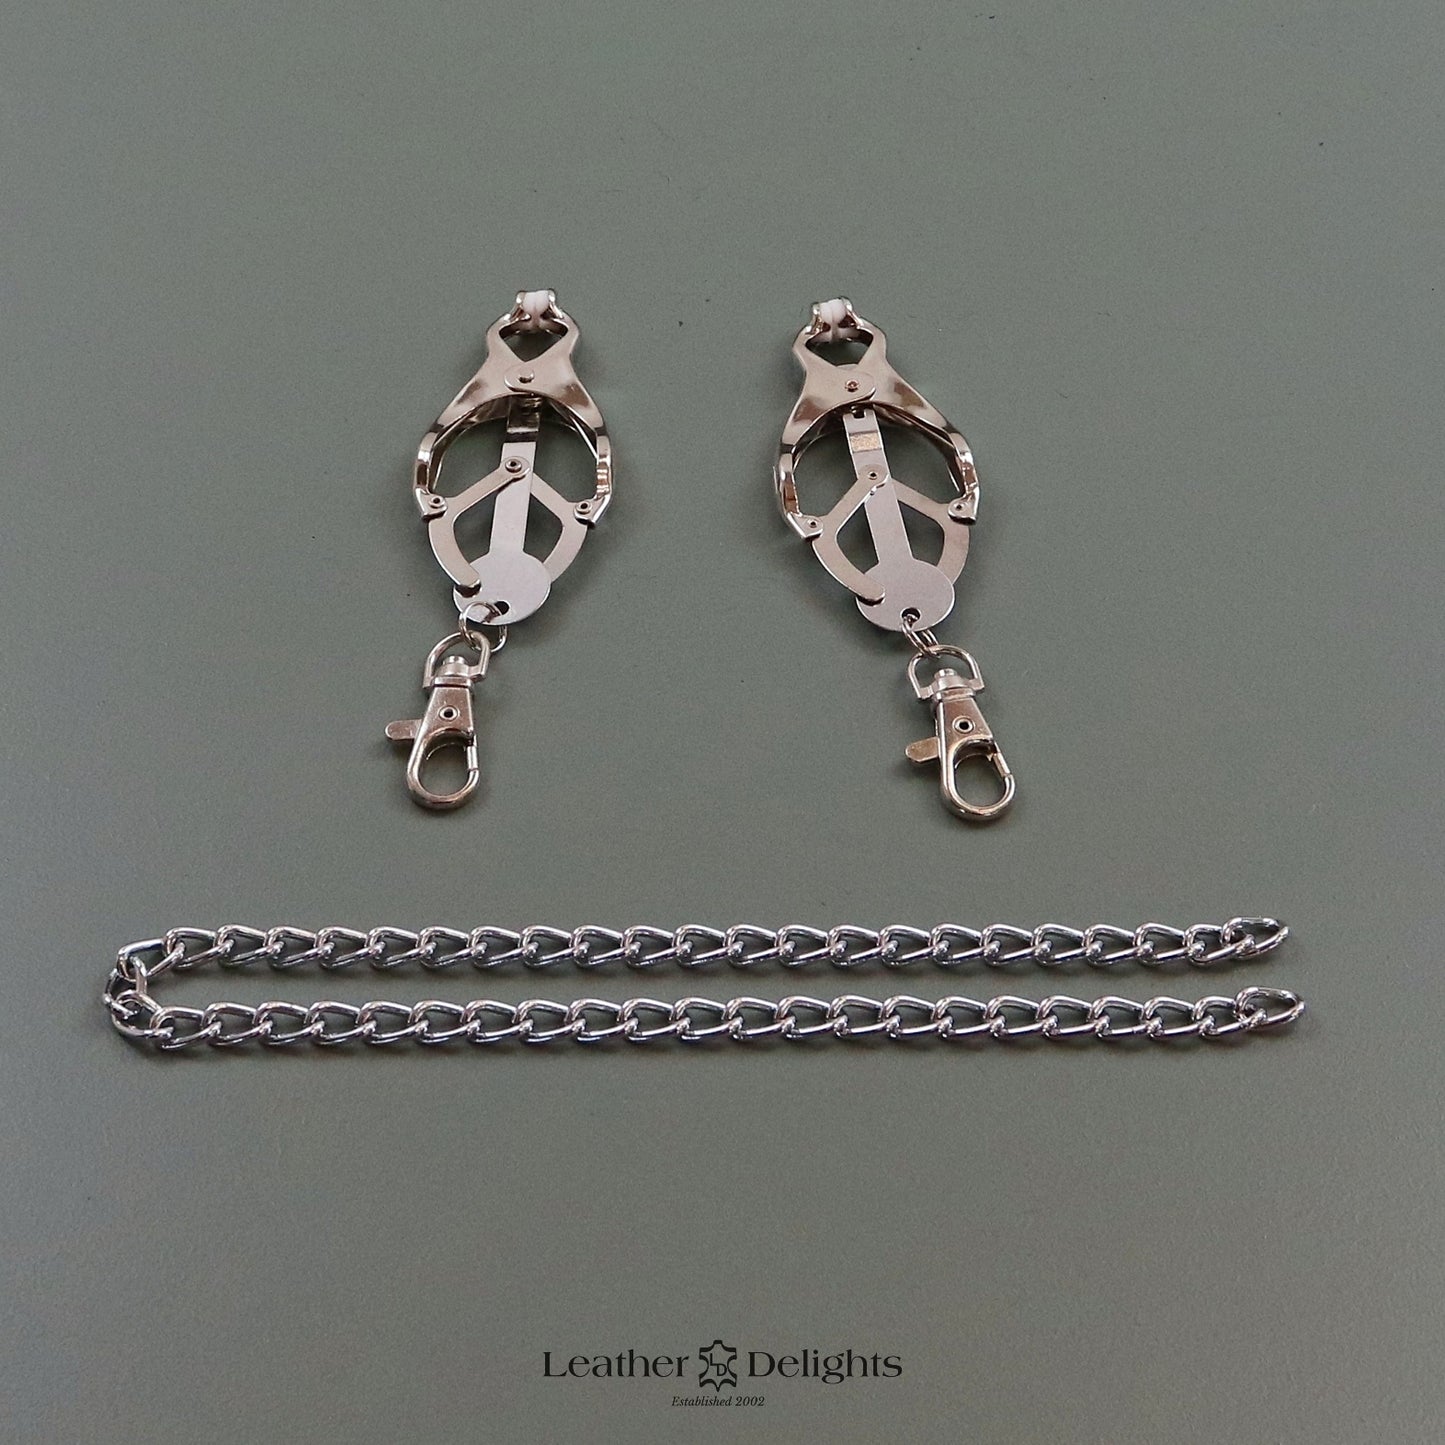 Clover Clamps with Chain